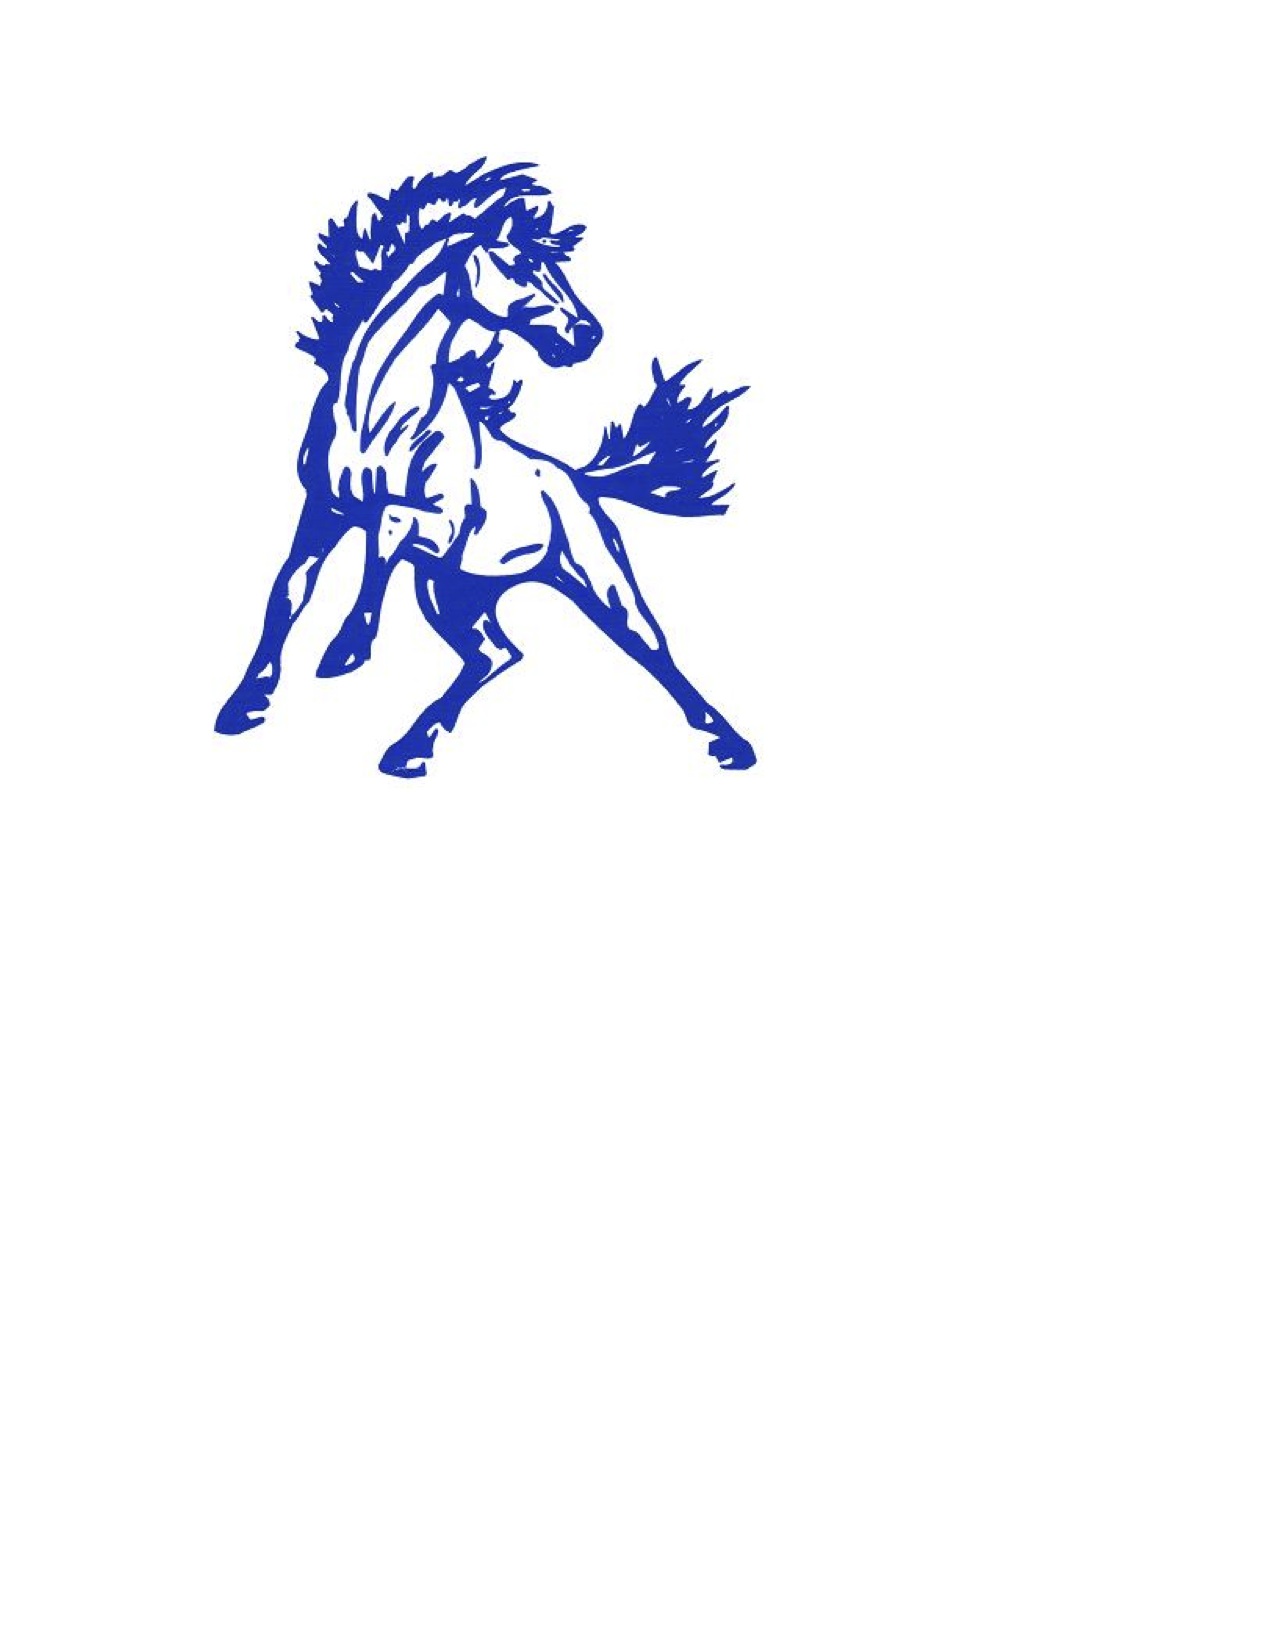 Images For  Mustang Silhouette Clip Art